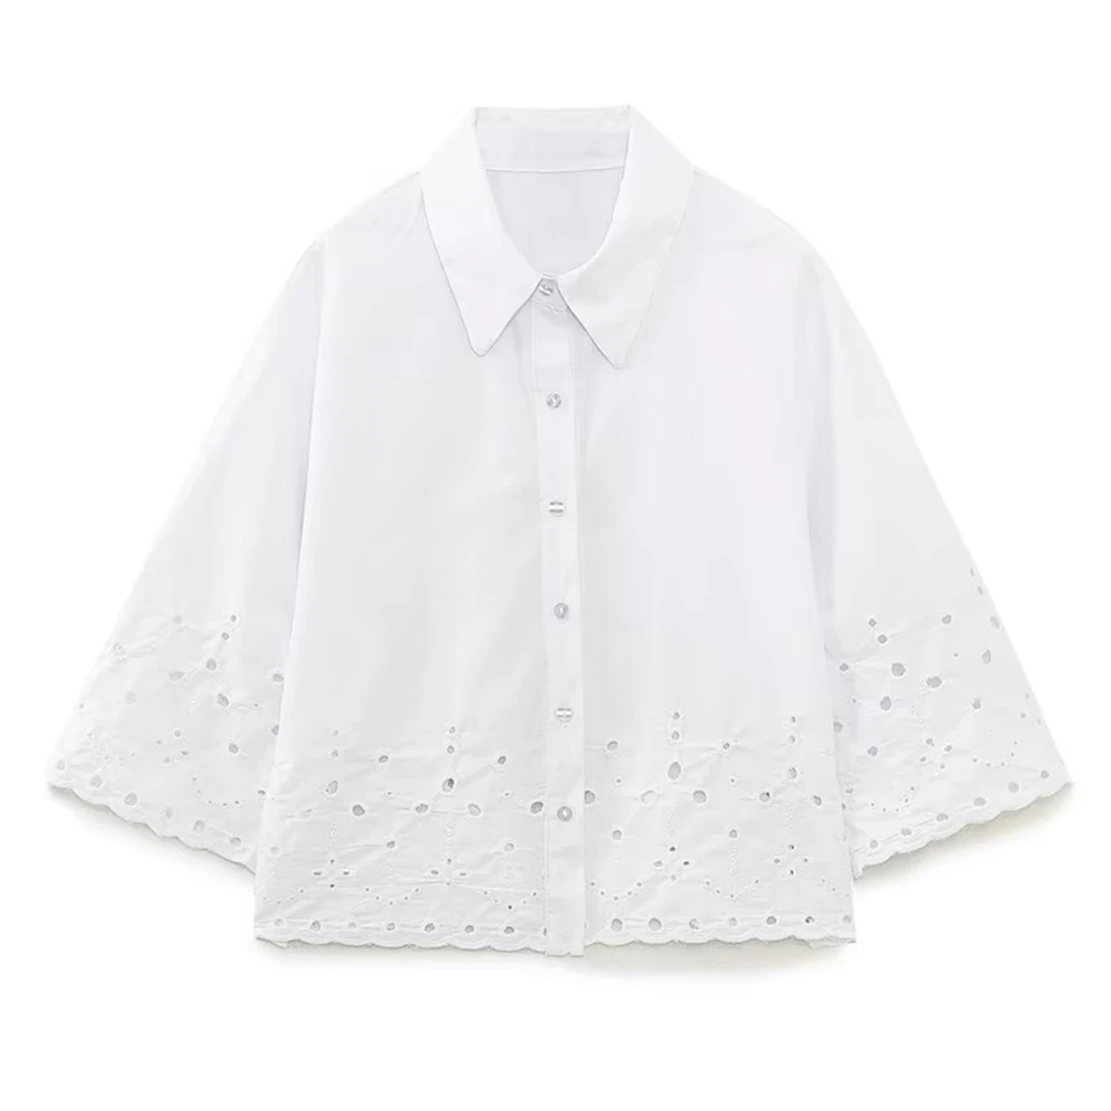 Withered Indie Folk Embroidery Hollow Out Short Shirt Fashion White Cotton Blouse Women Tops